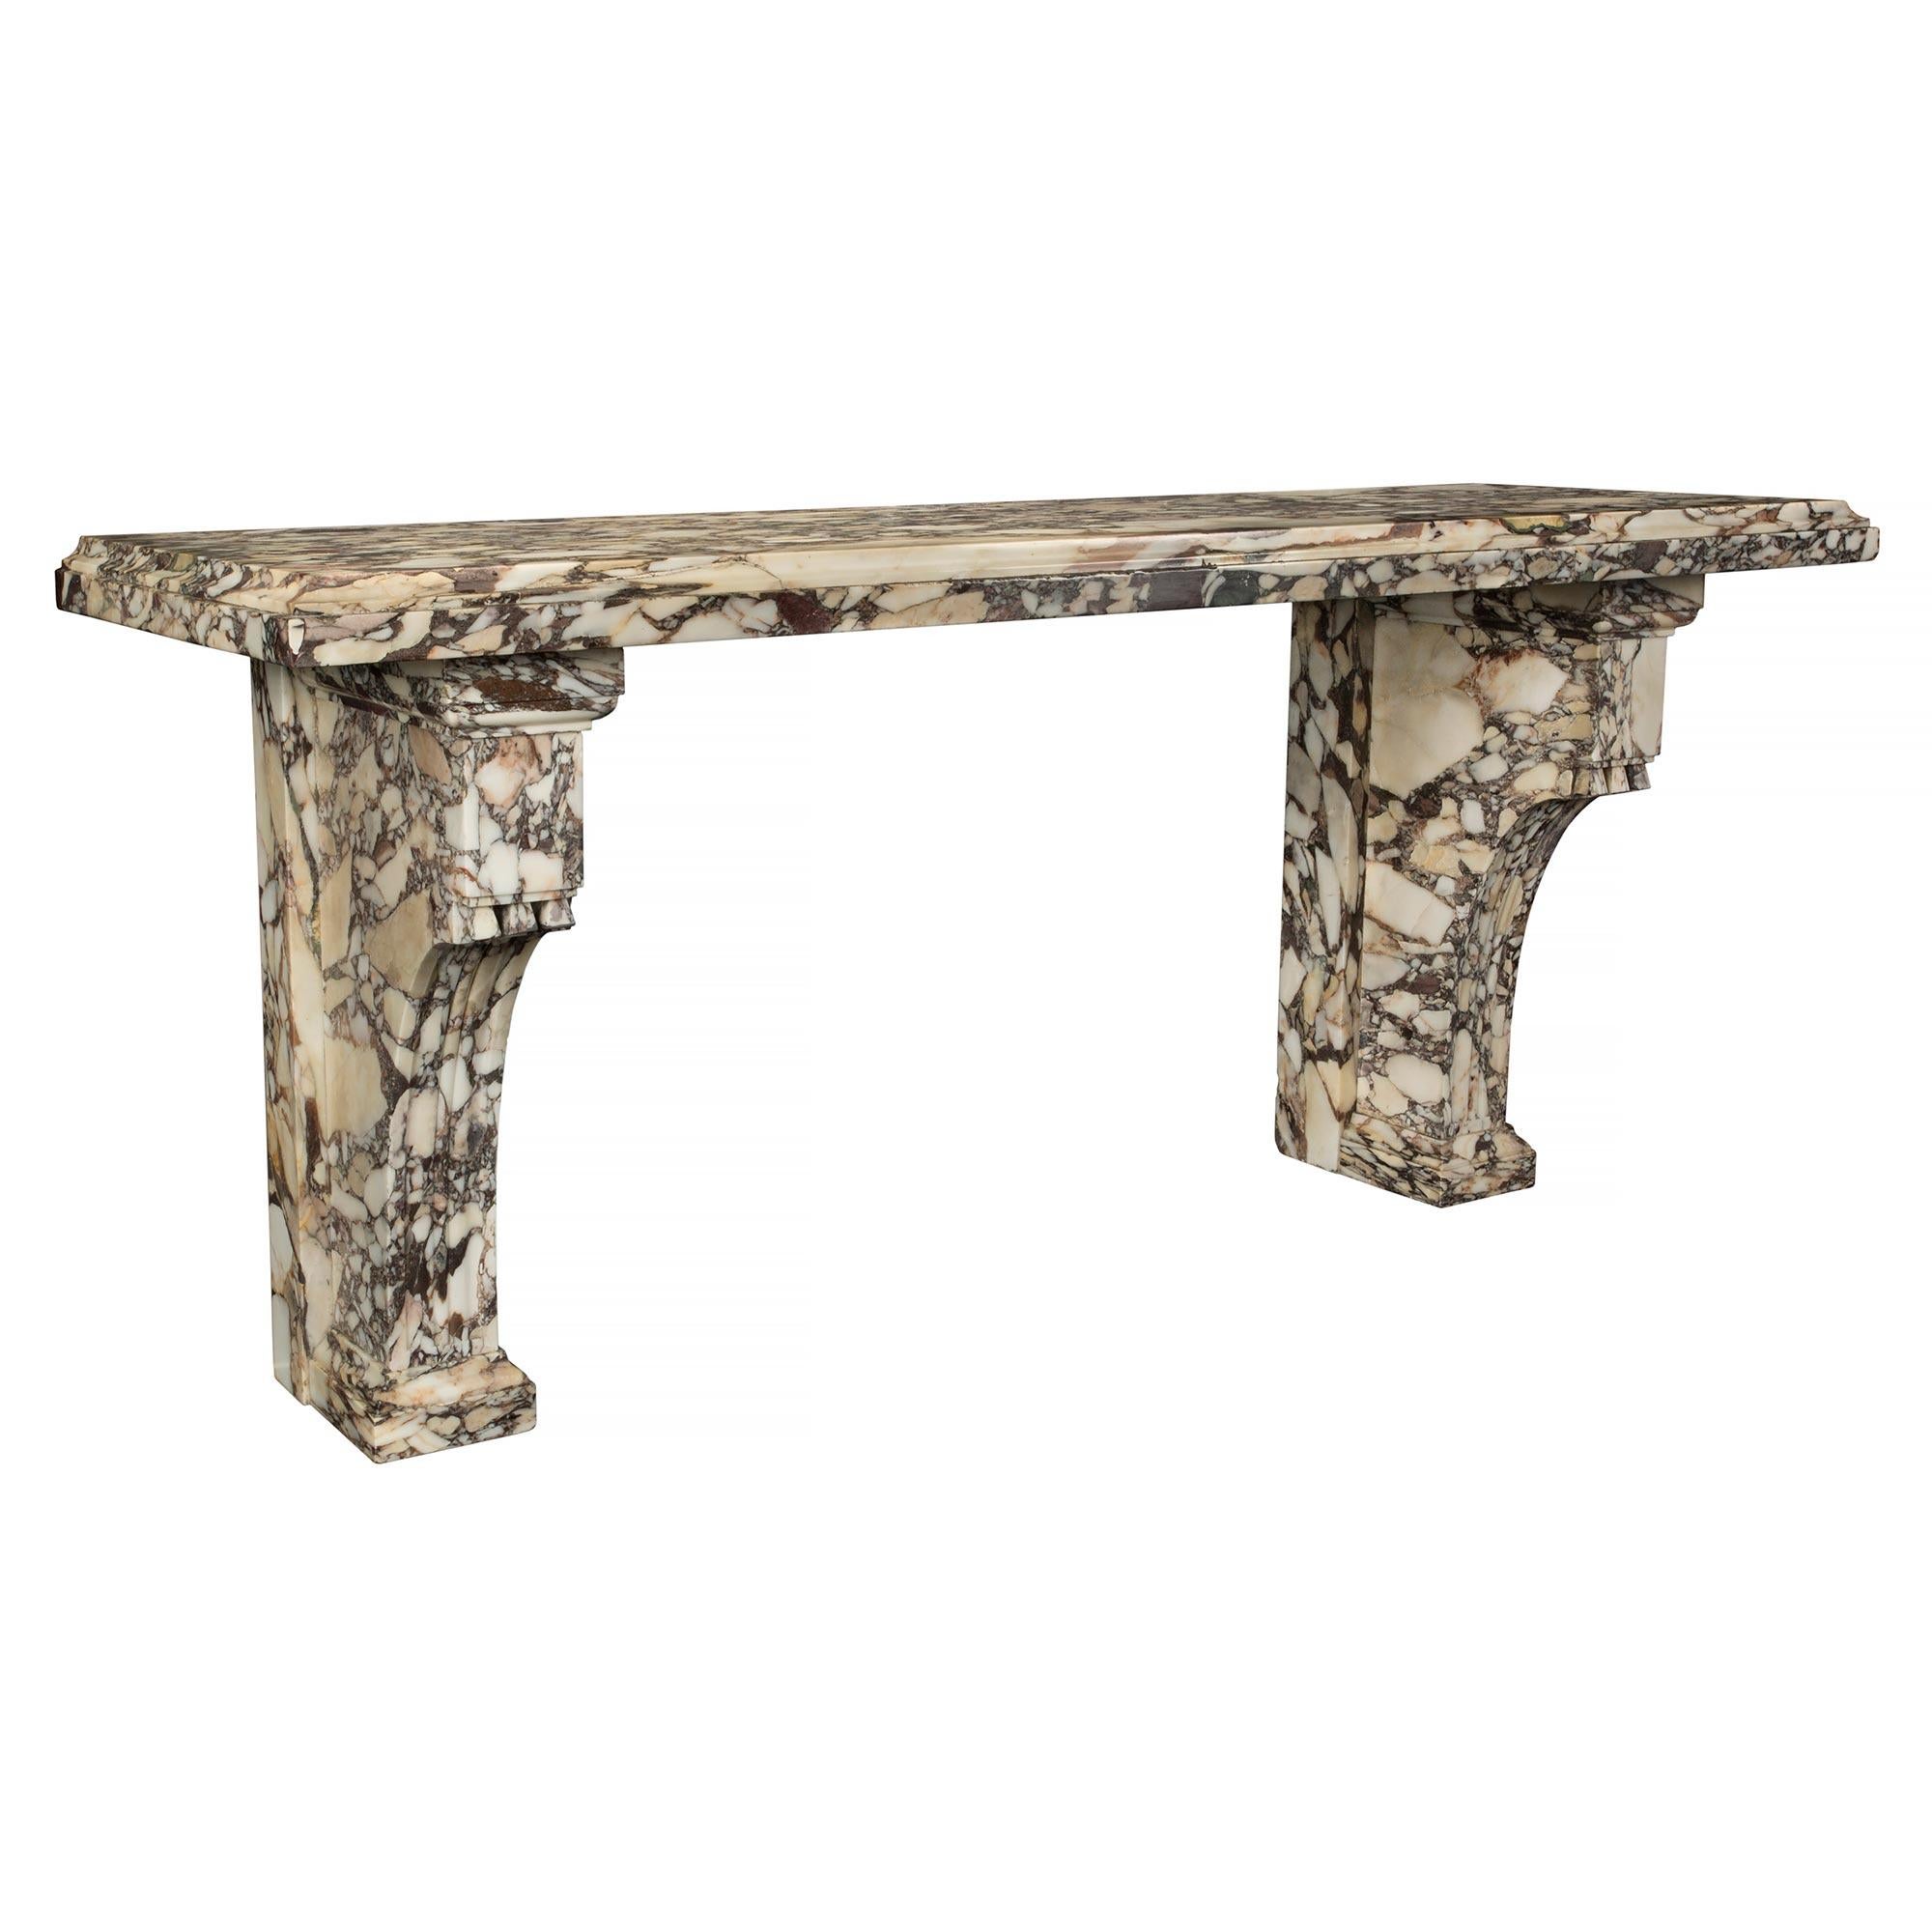 Italian 19th Century Louis XVI Style Breccia Medecis Marble Console In Good Condition For Sale In West Palm Beach, FL